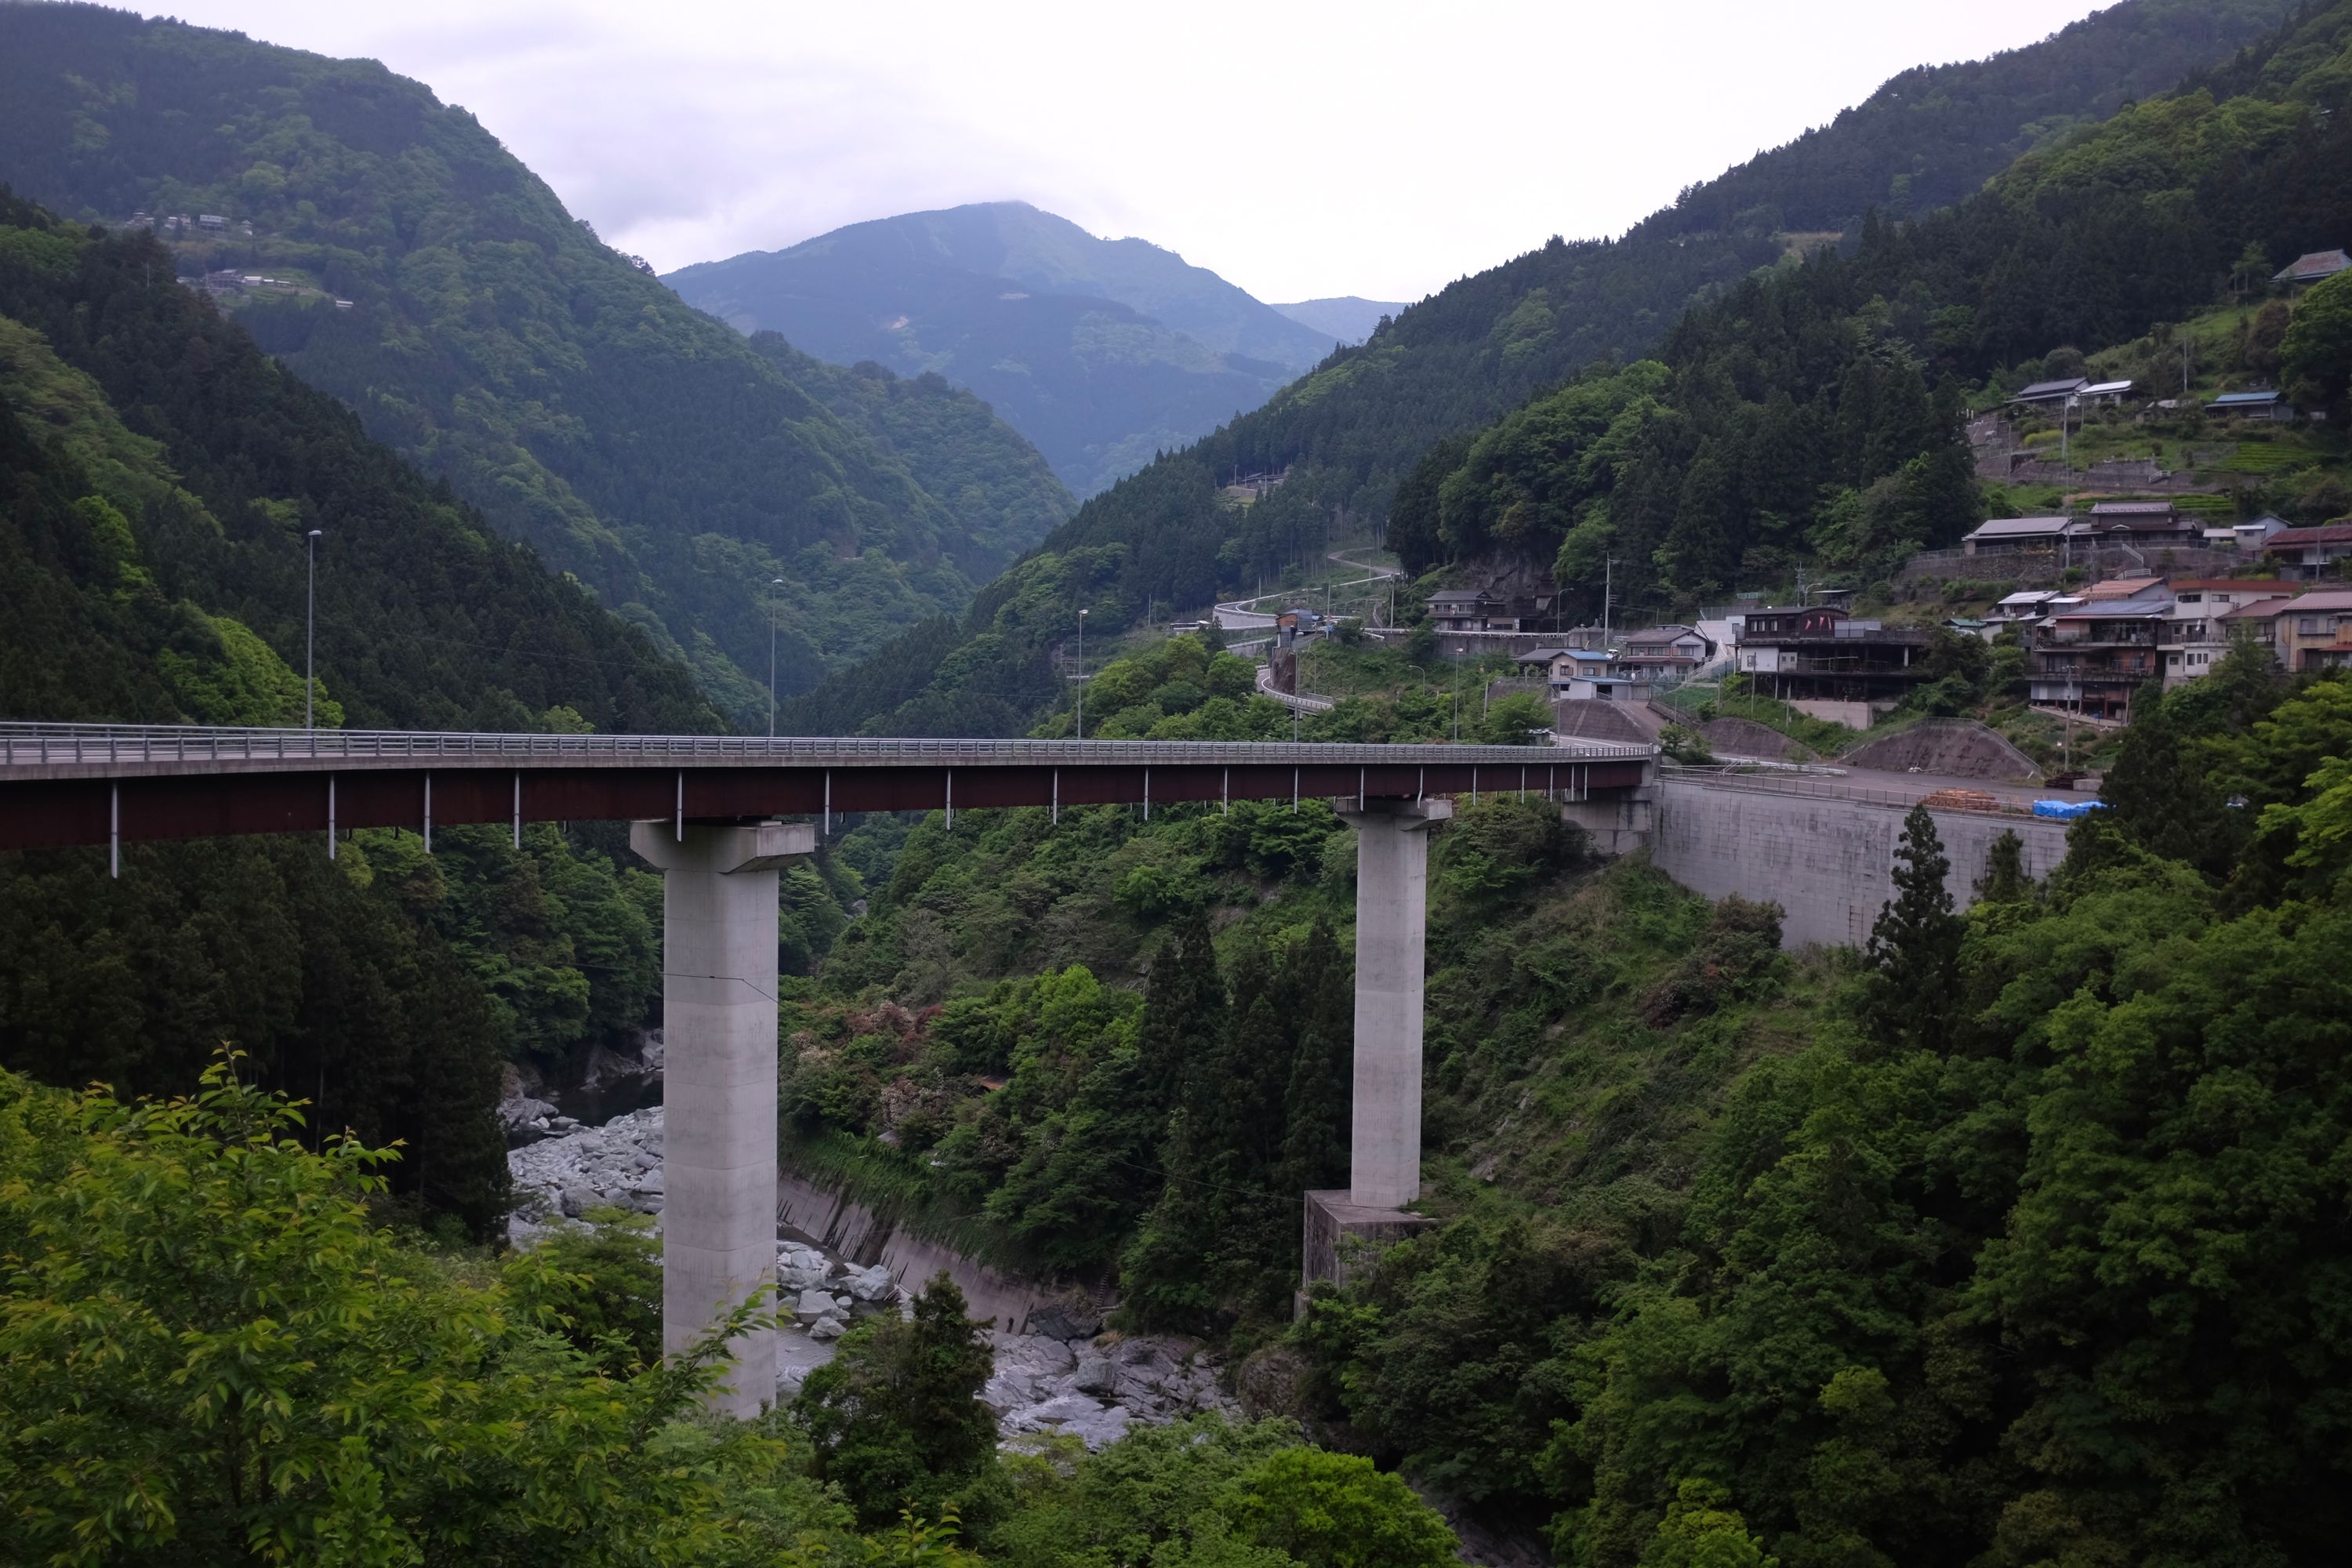 A highway crosses a mountain river on a high concrete bridge, with a village on the other side and forested hills in the distance.